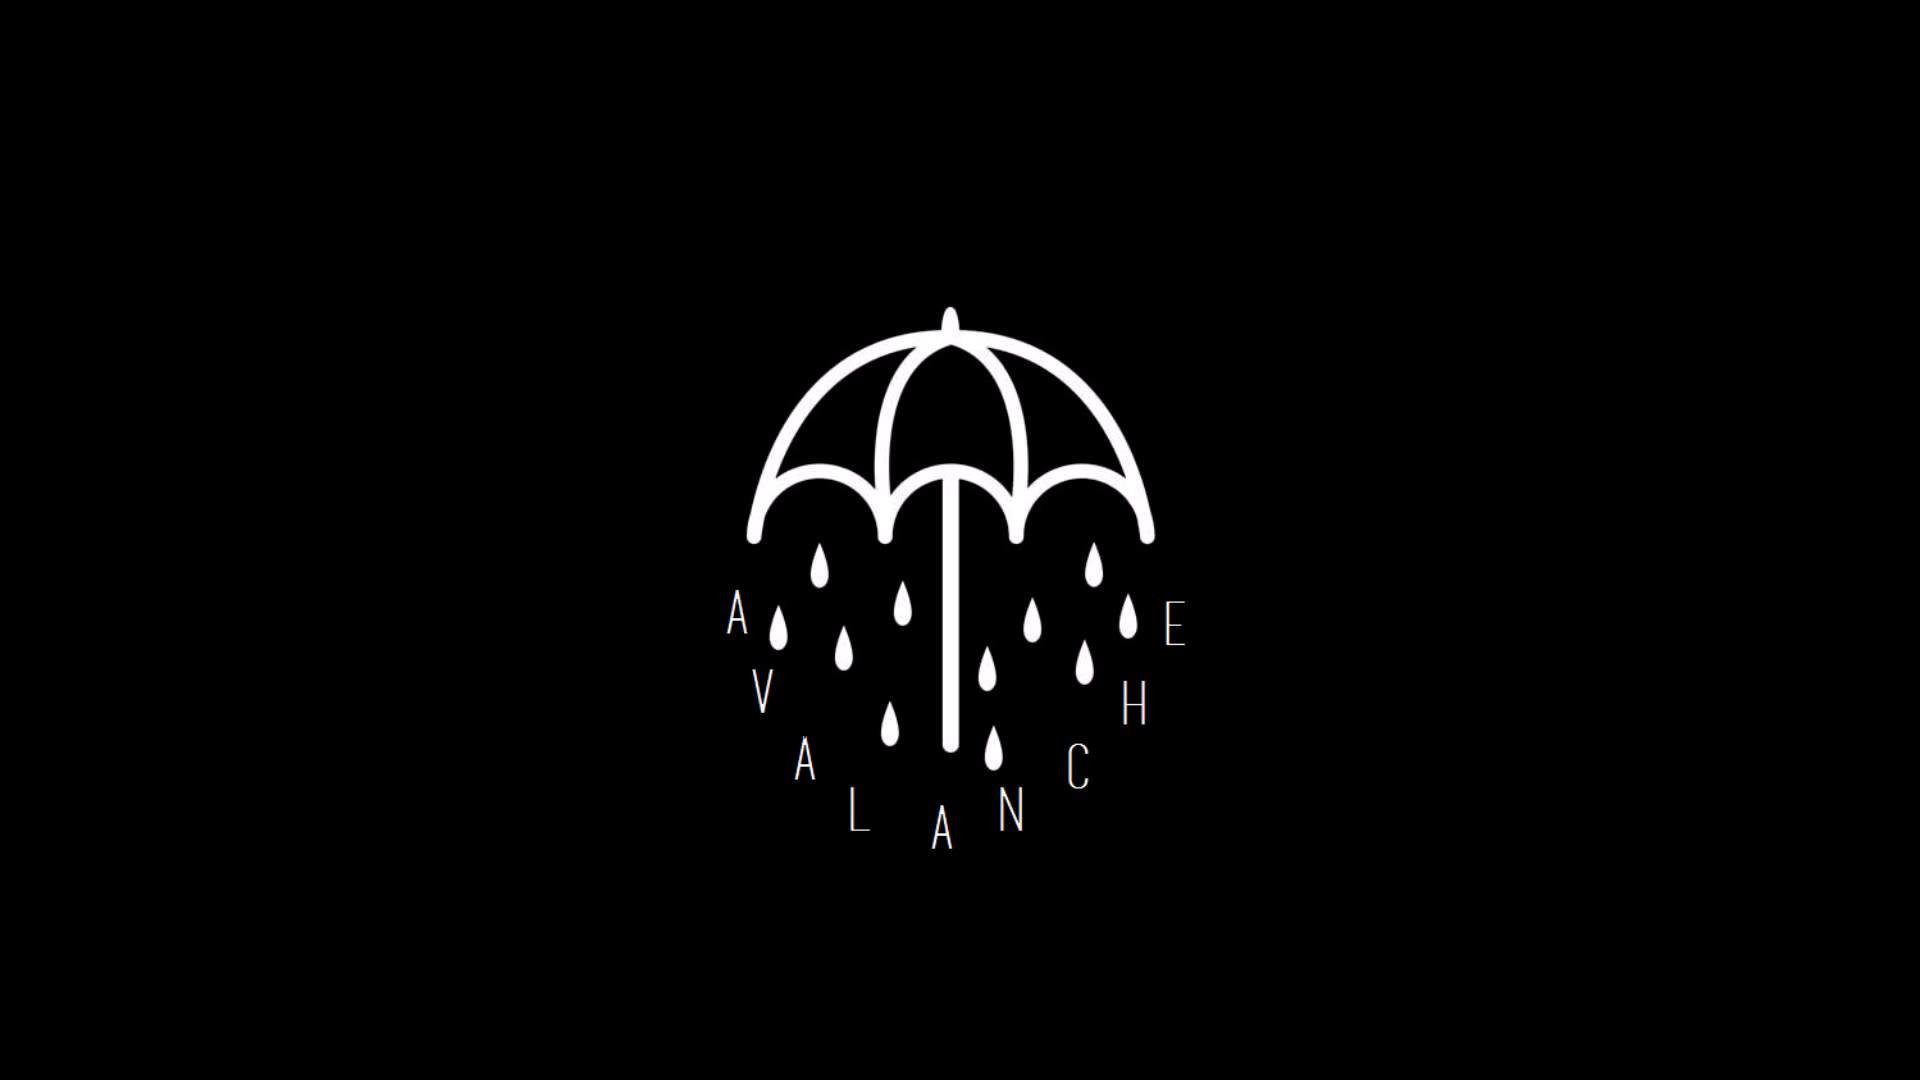 1920x1080 Bring Me the Horizon - Avalanche (Acoustic Cover)